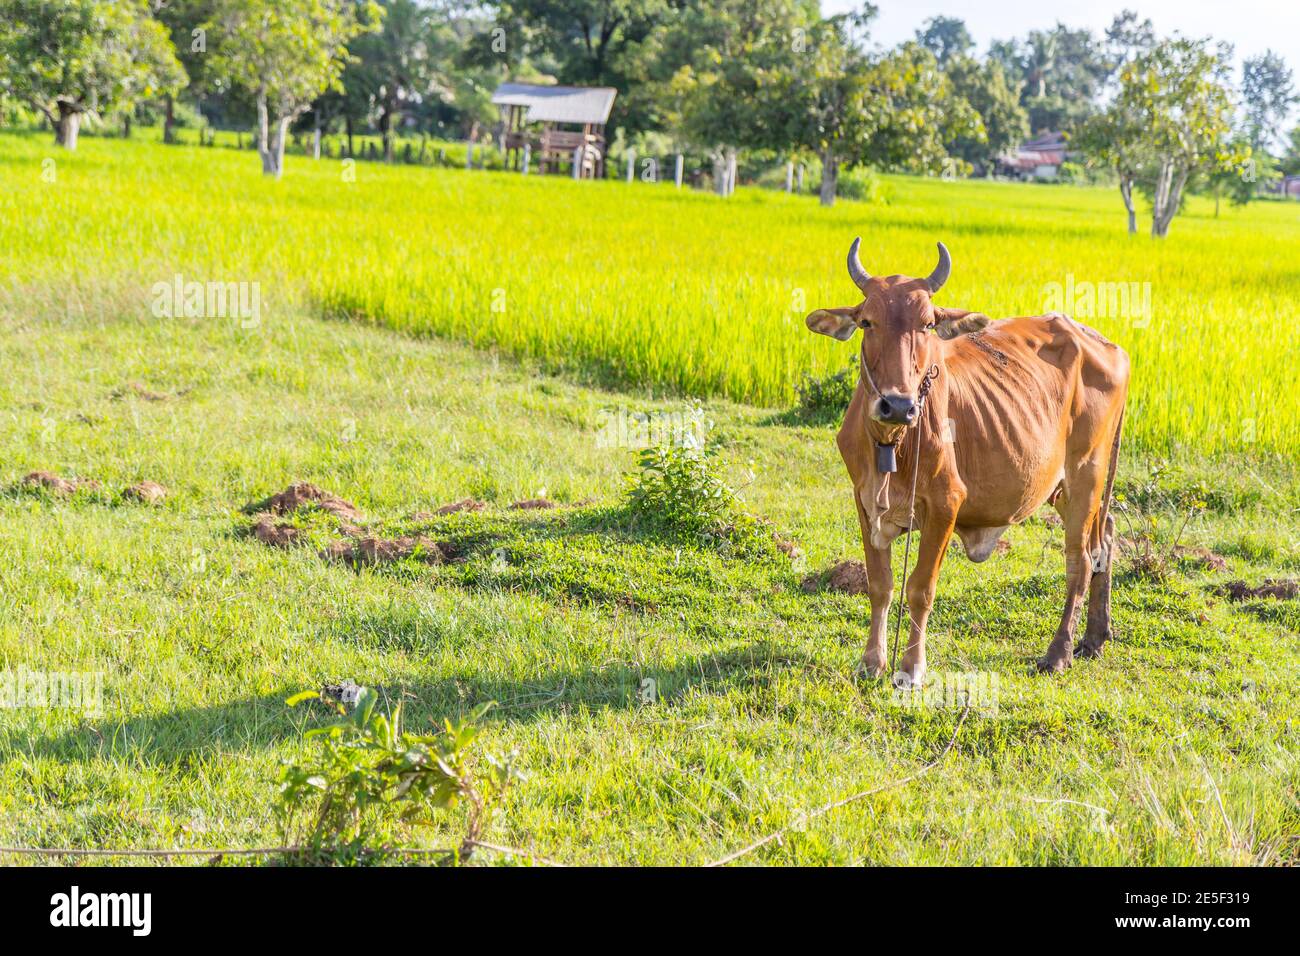 Cow in the rice farm, Thailand Stock Photo